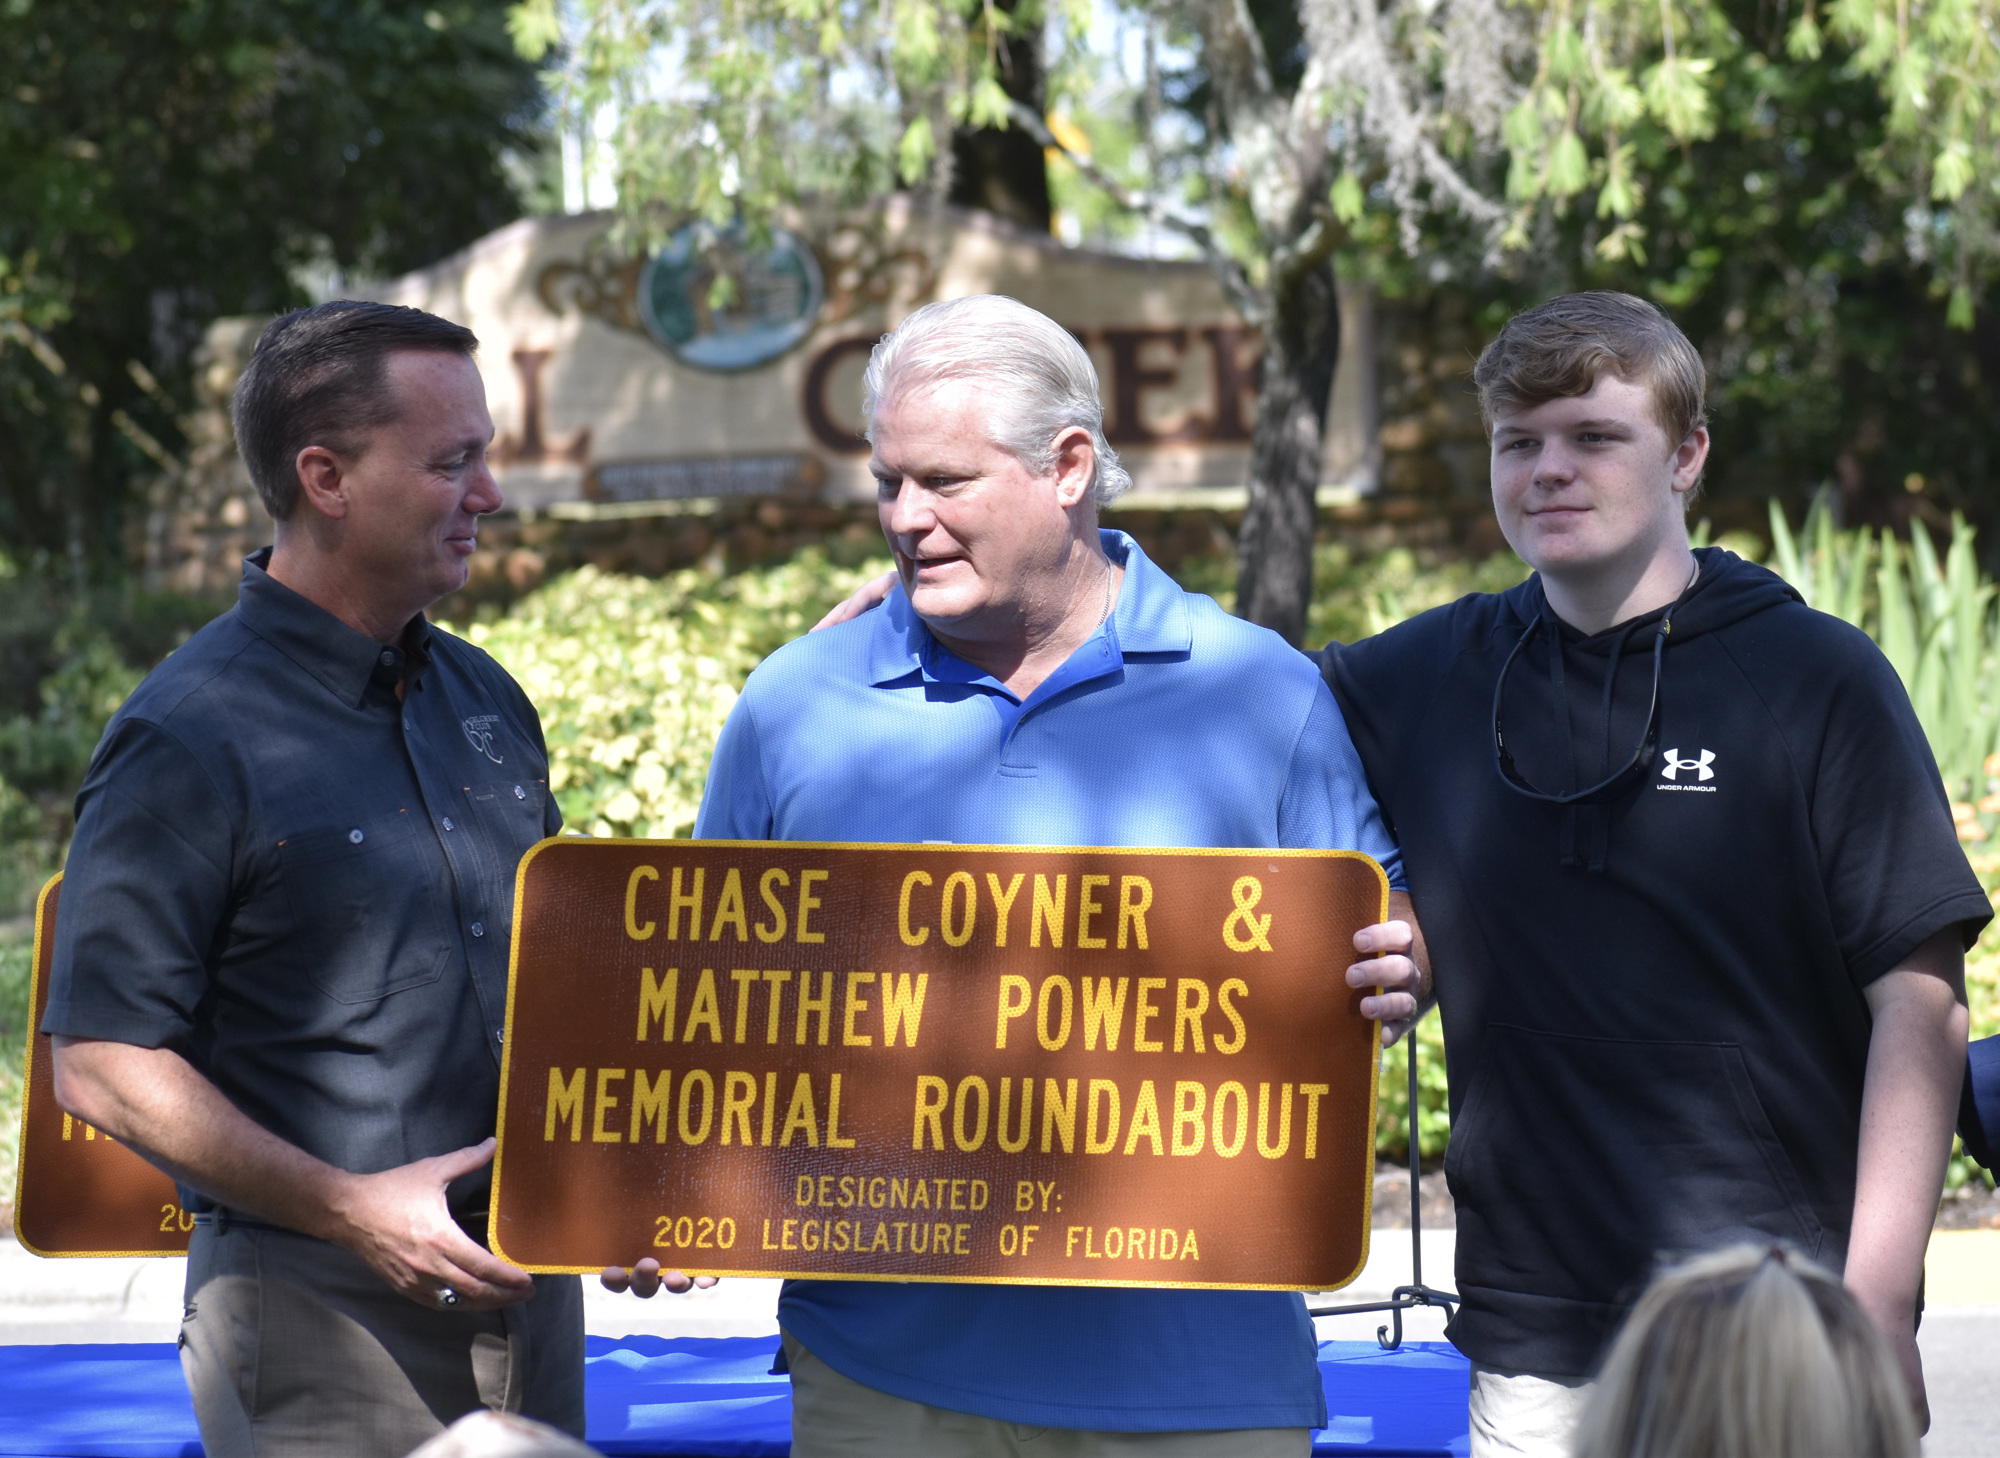 Rep. Tommy Gregory presents Scott Coyner and Cory Coyner with a plaque to honor Chase Coyner and Matthew Powers.